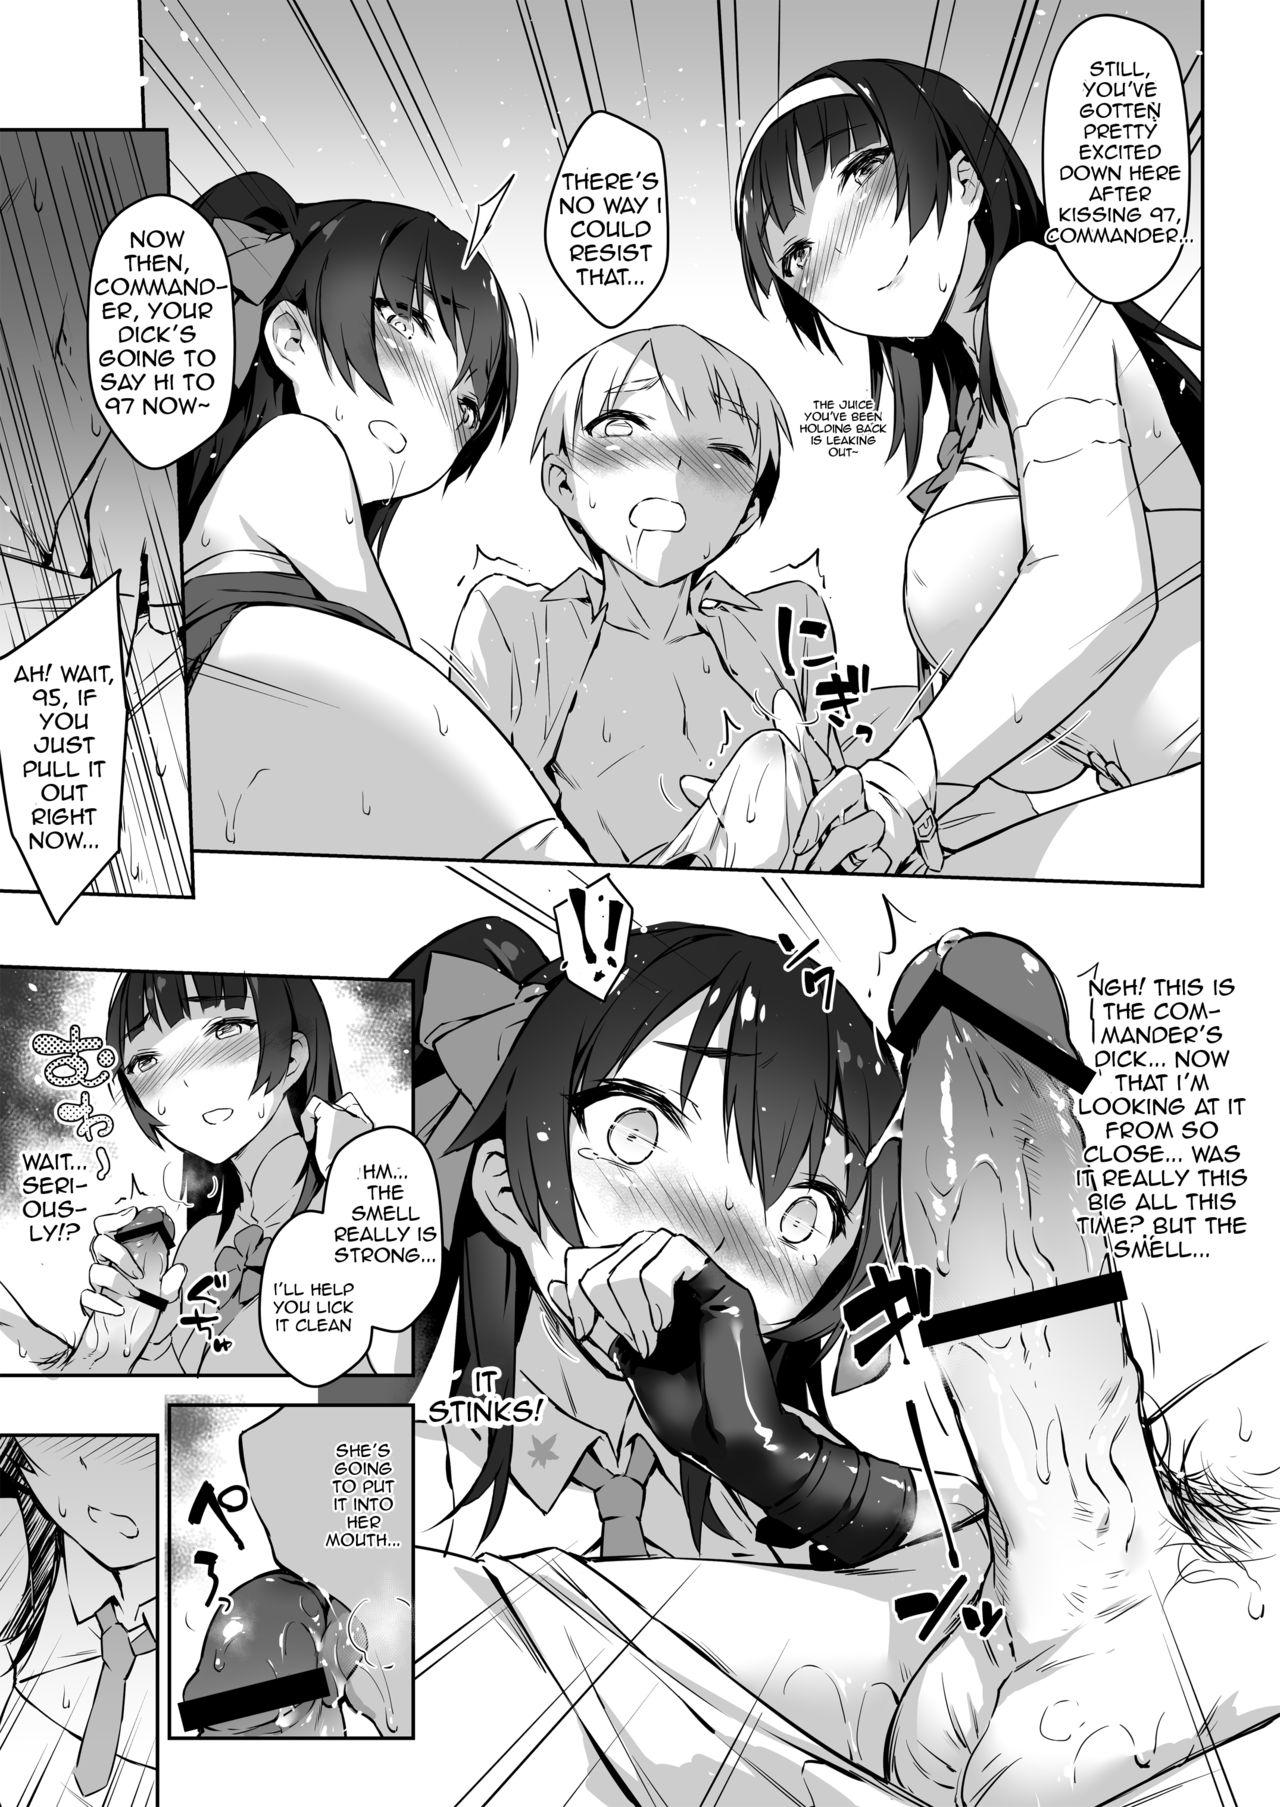 Blows Type 95 Type 97, Let Your Big Sister Teach You! - Girls frontline Tight Pussy Fuck - Page 11